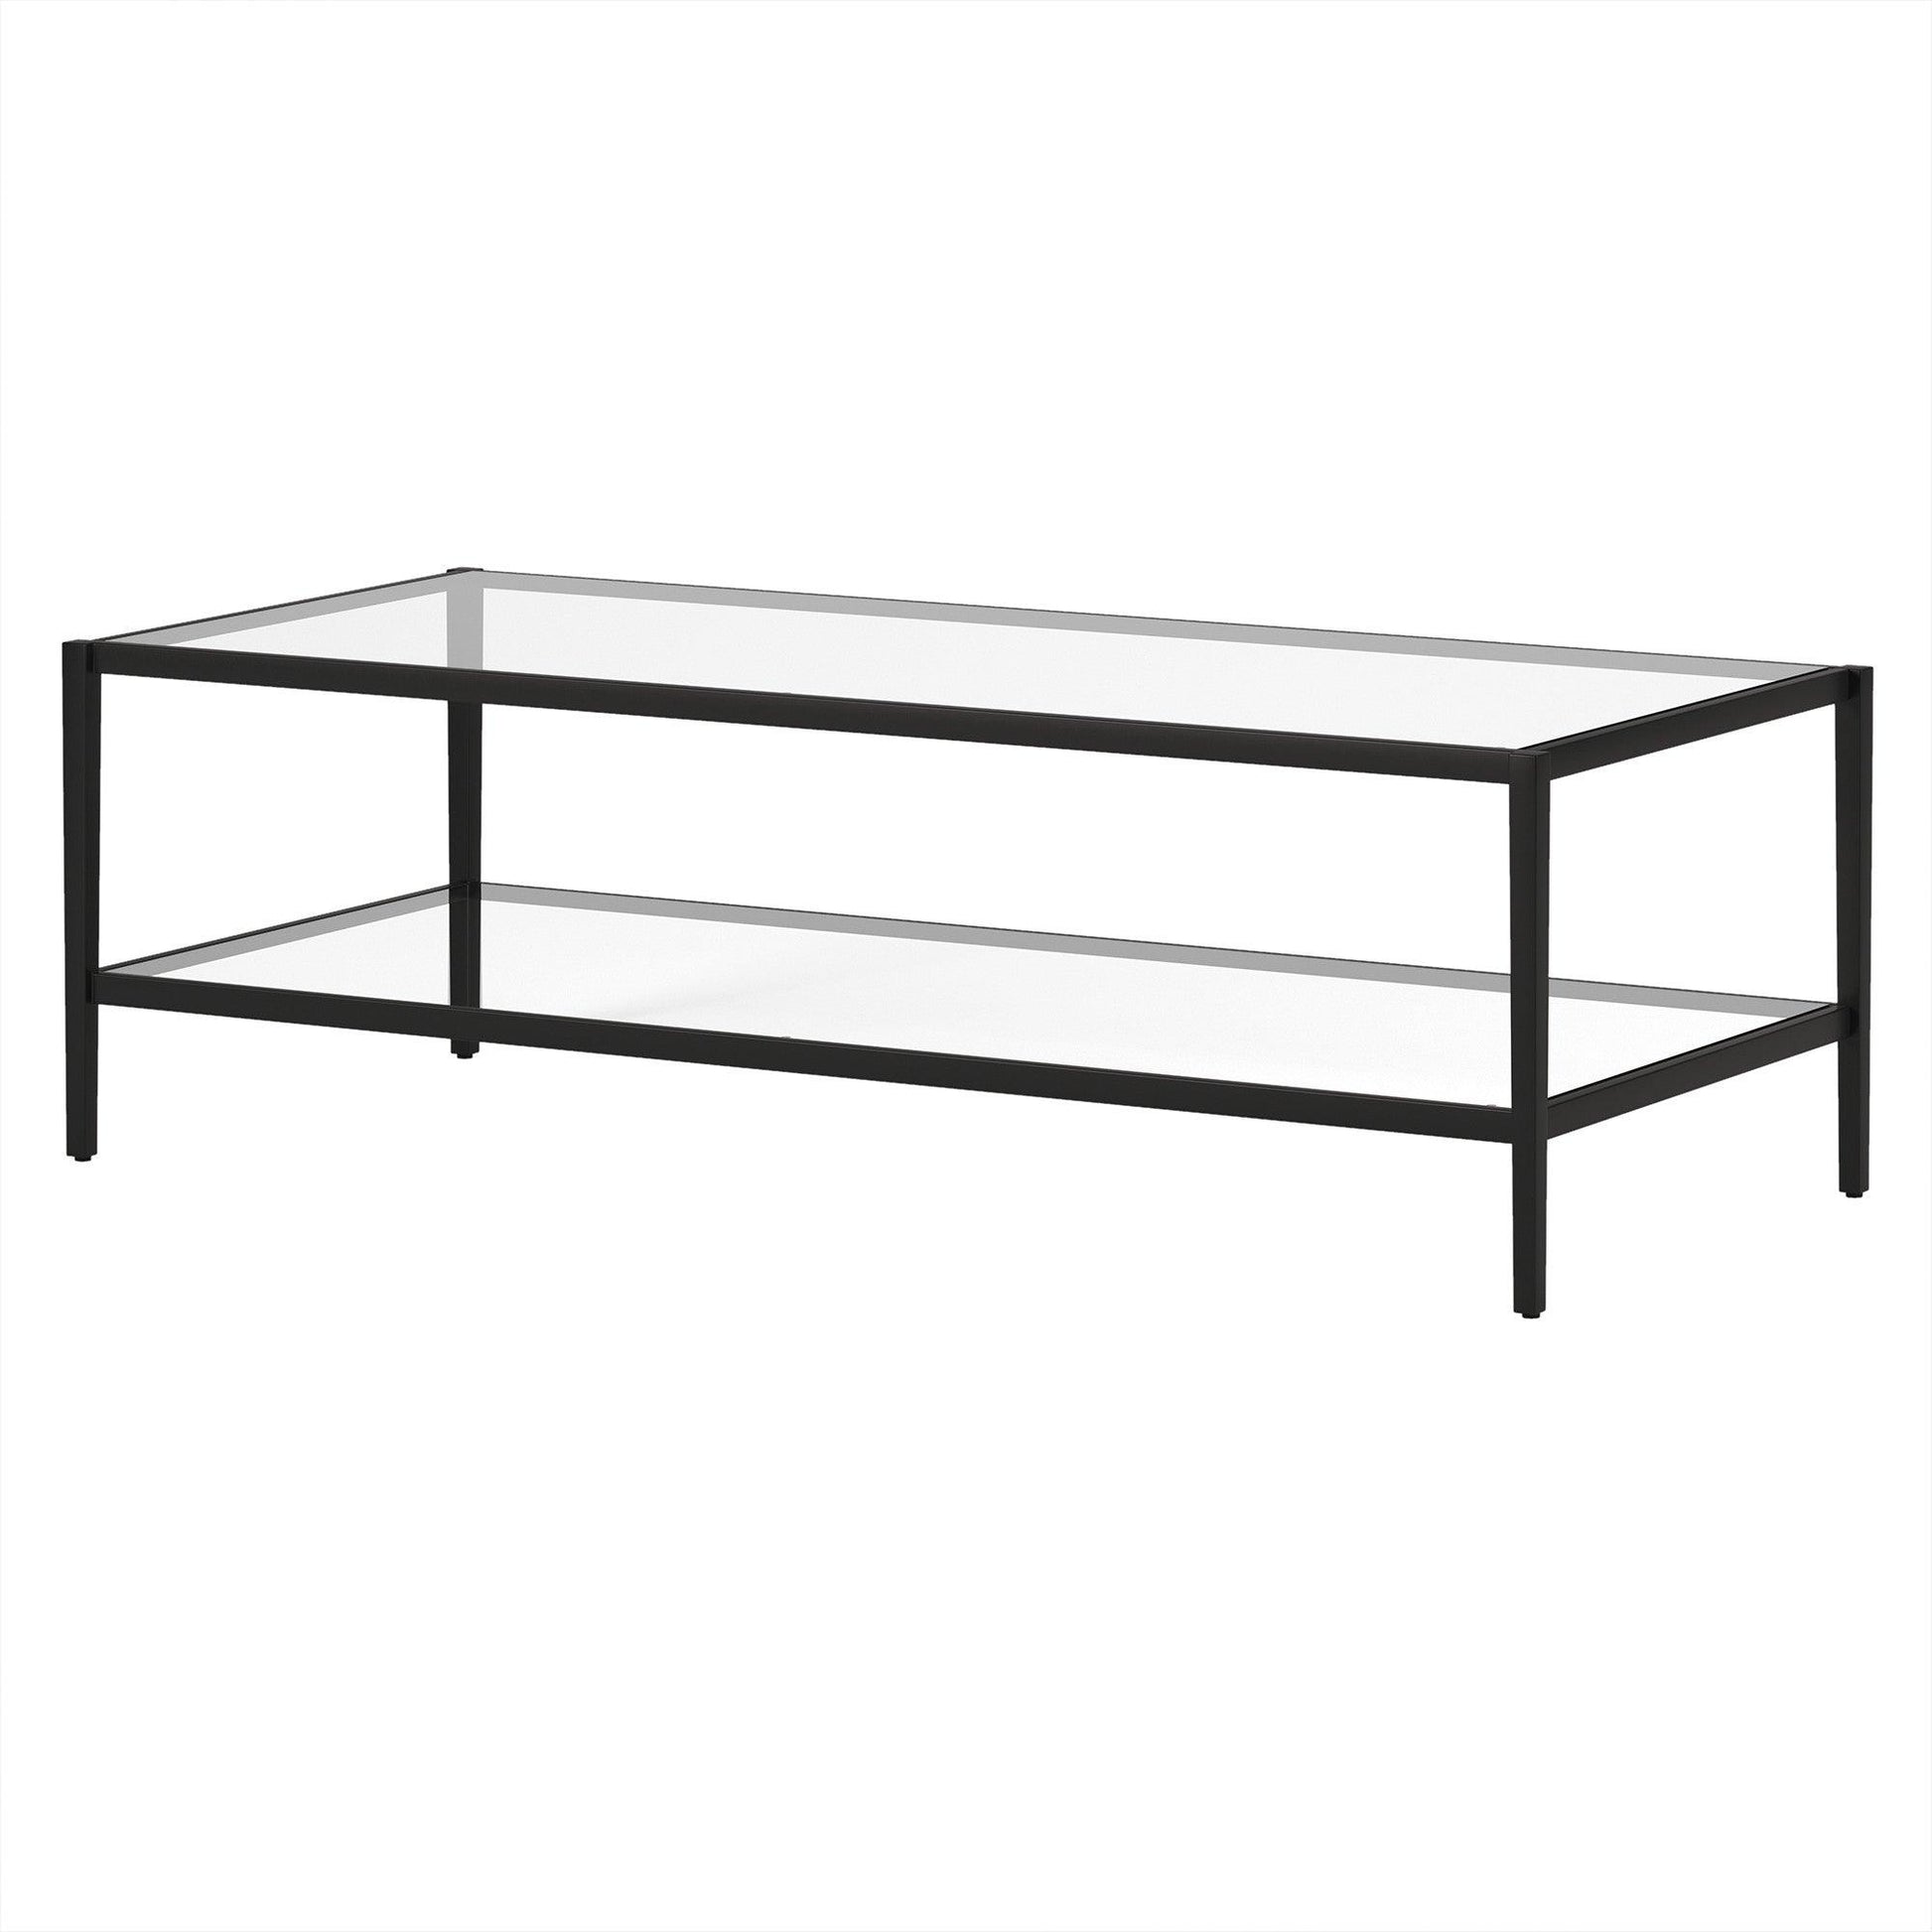 54" Black Glass And Steel Coffee Table With Shelf - FurniFindUSA